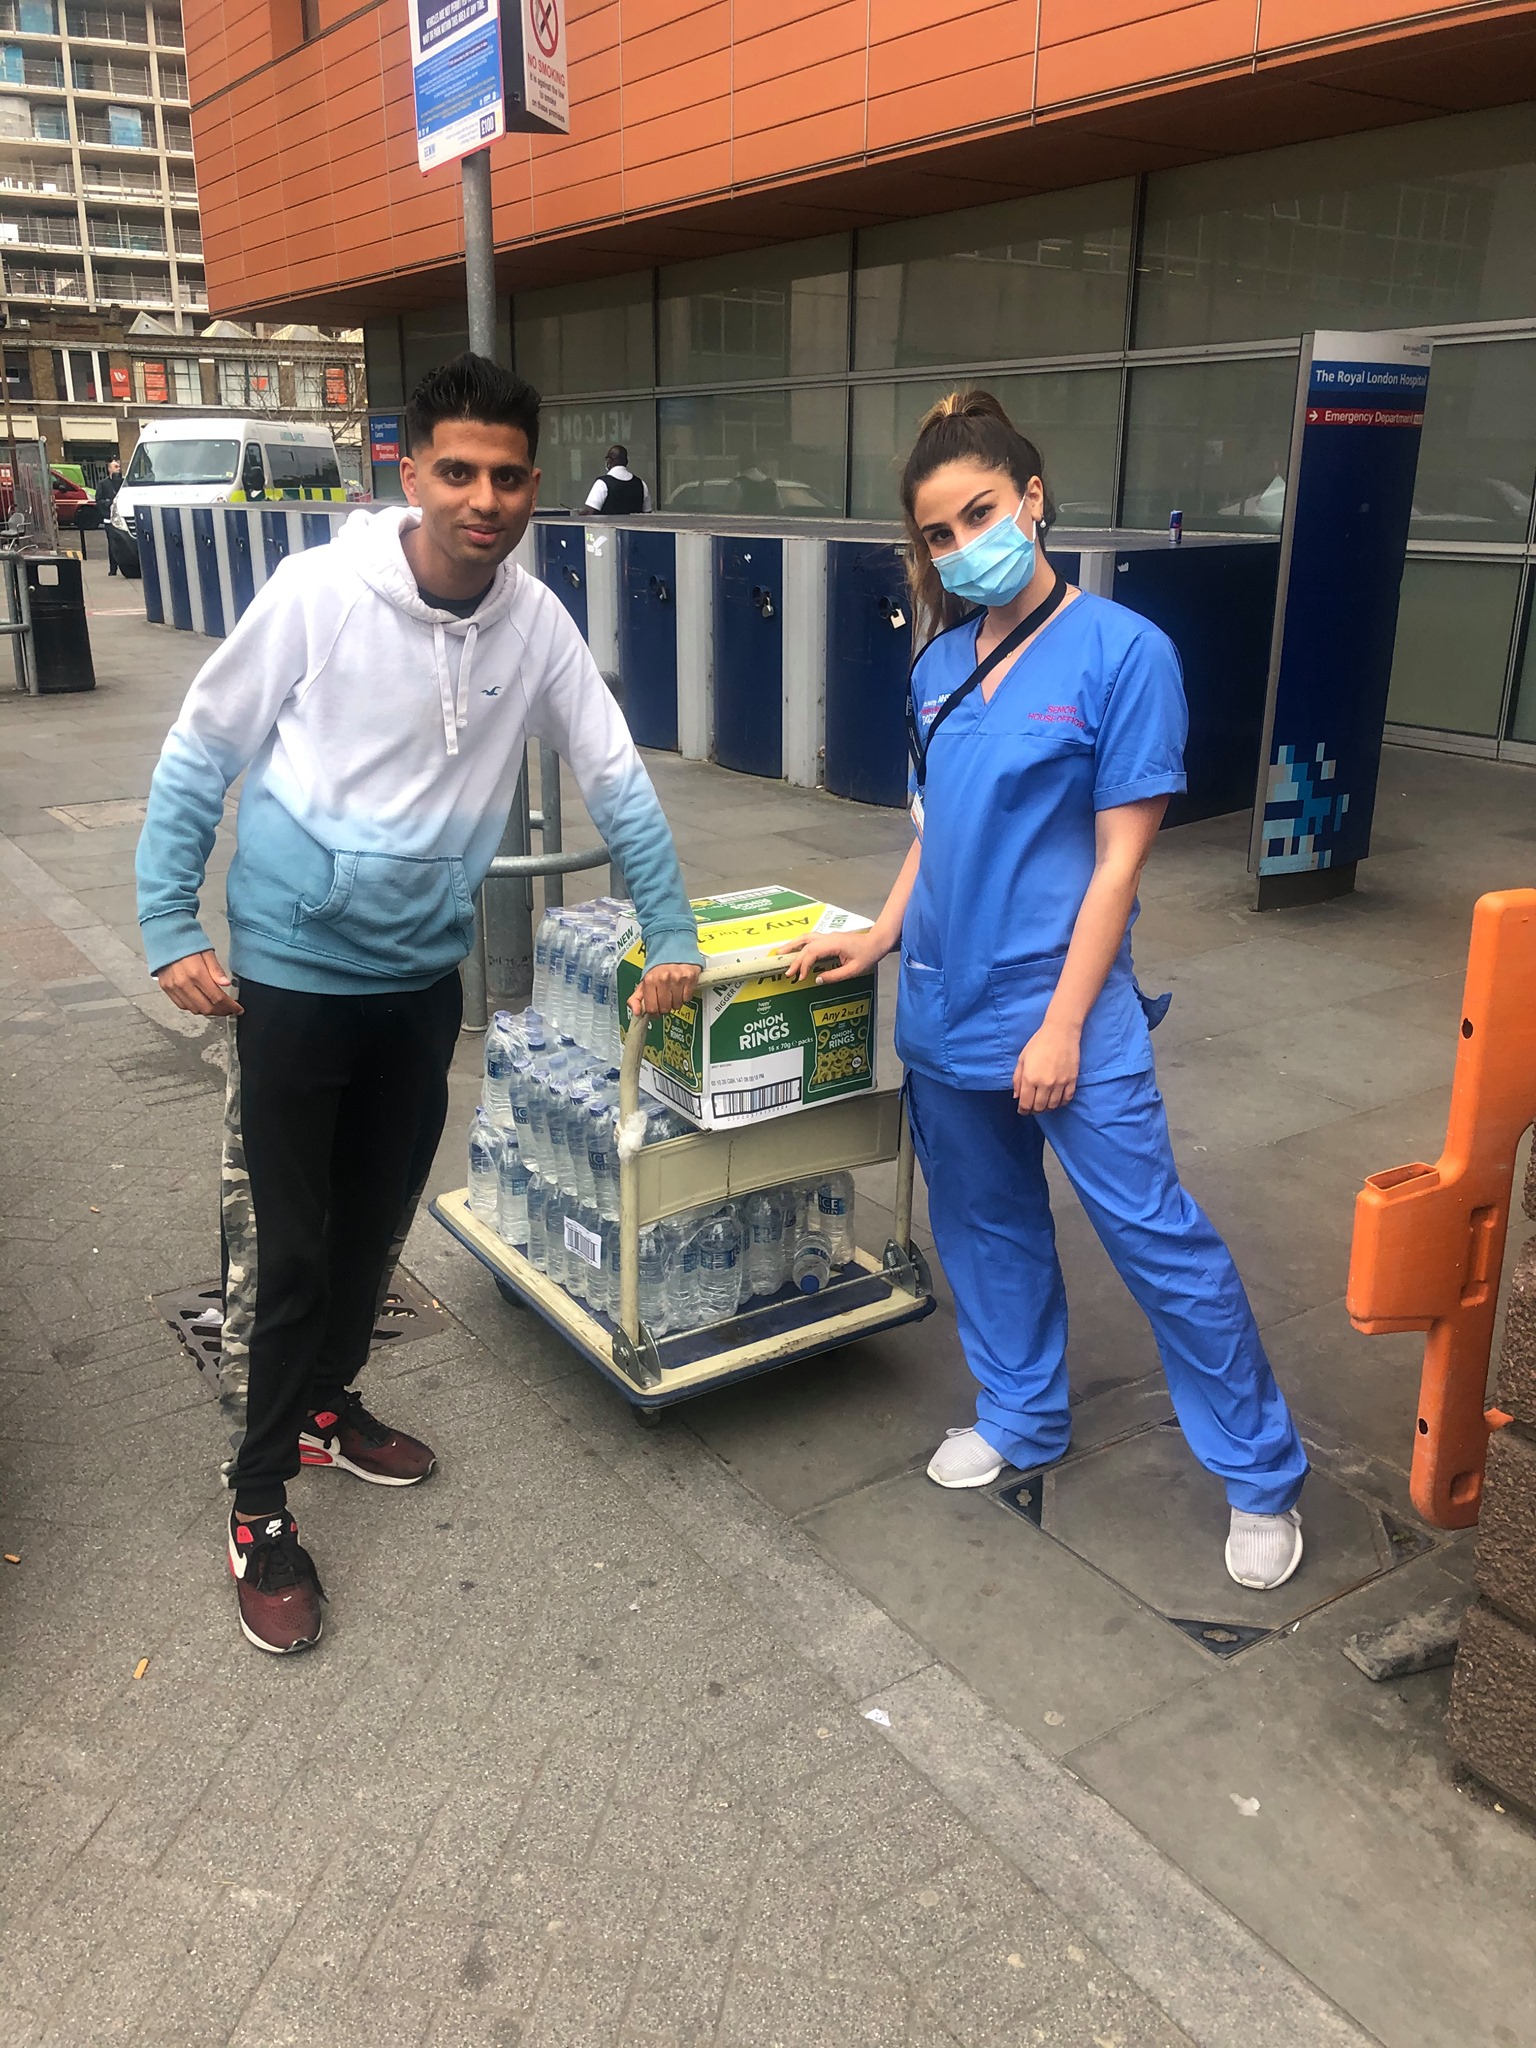 Neil Shonchhatra delivering water to a local hospital